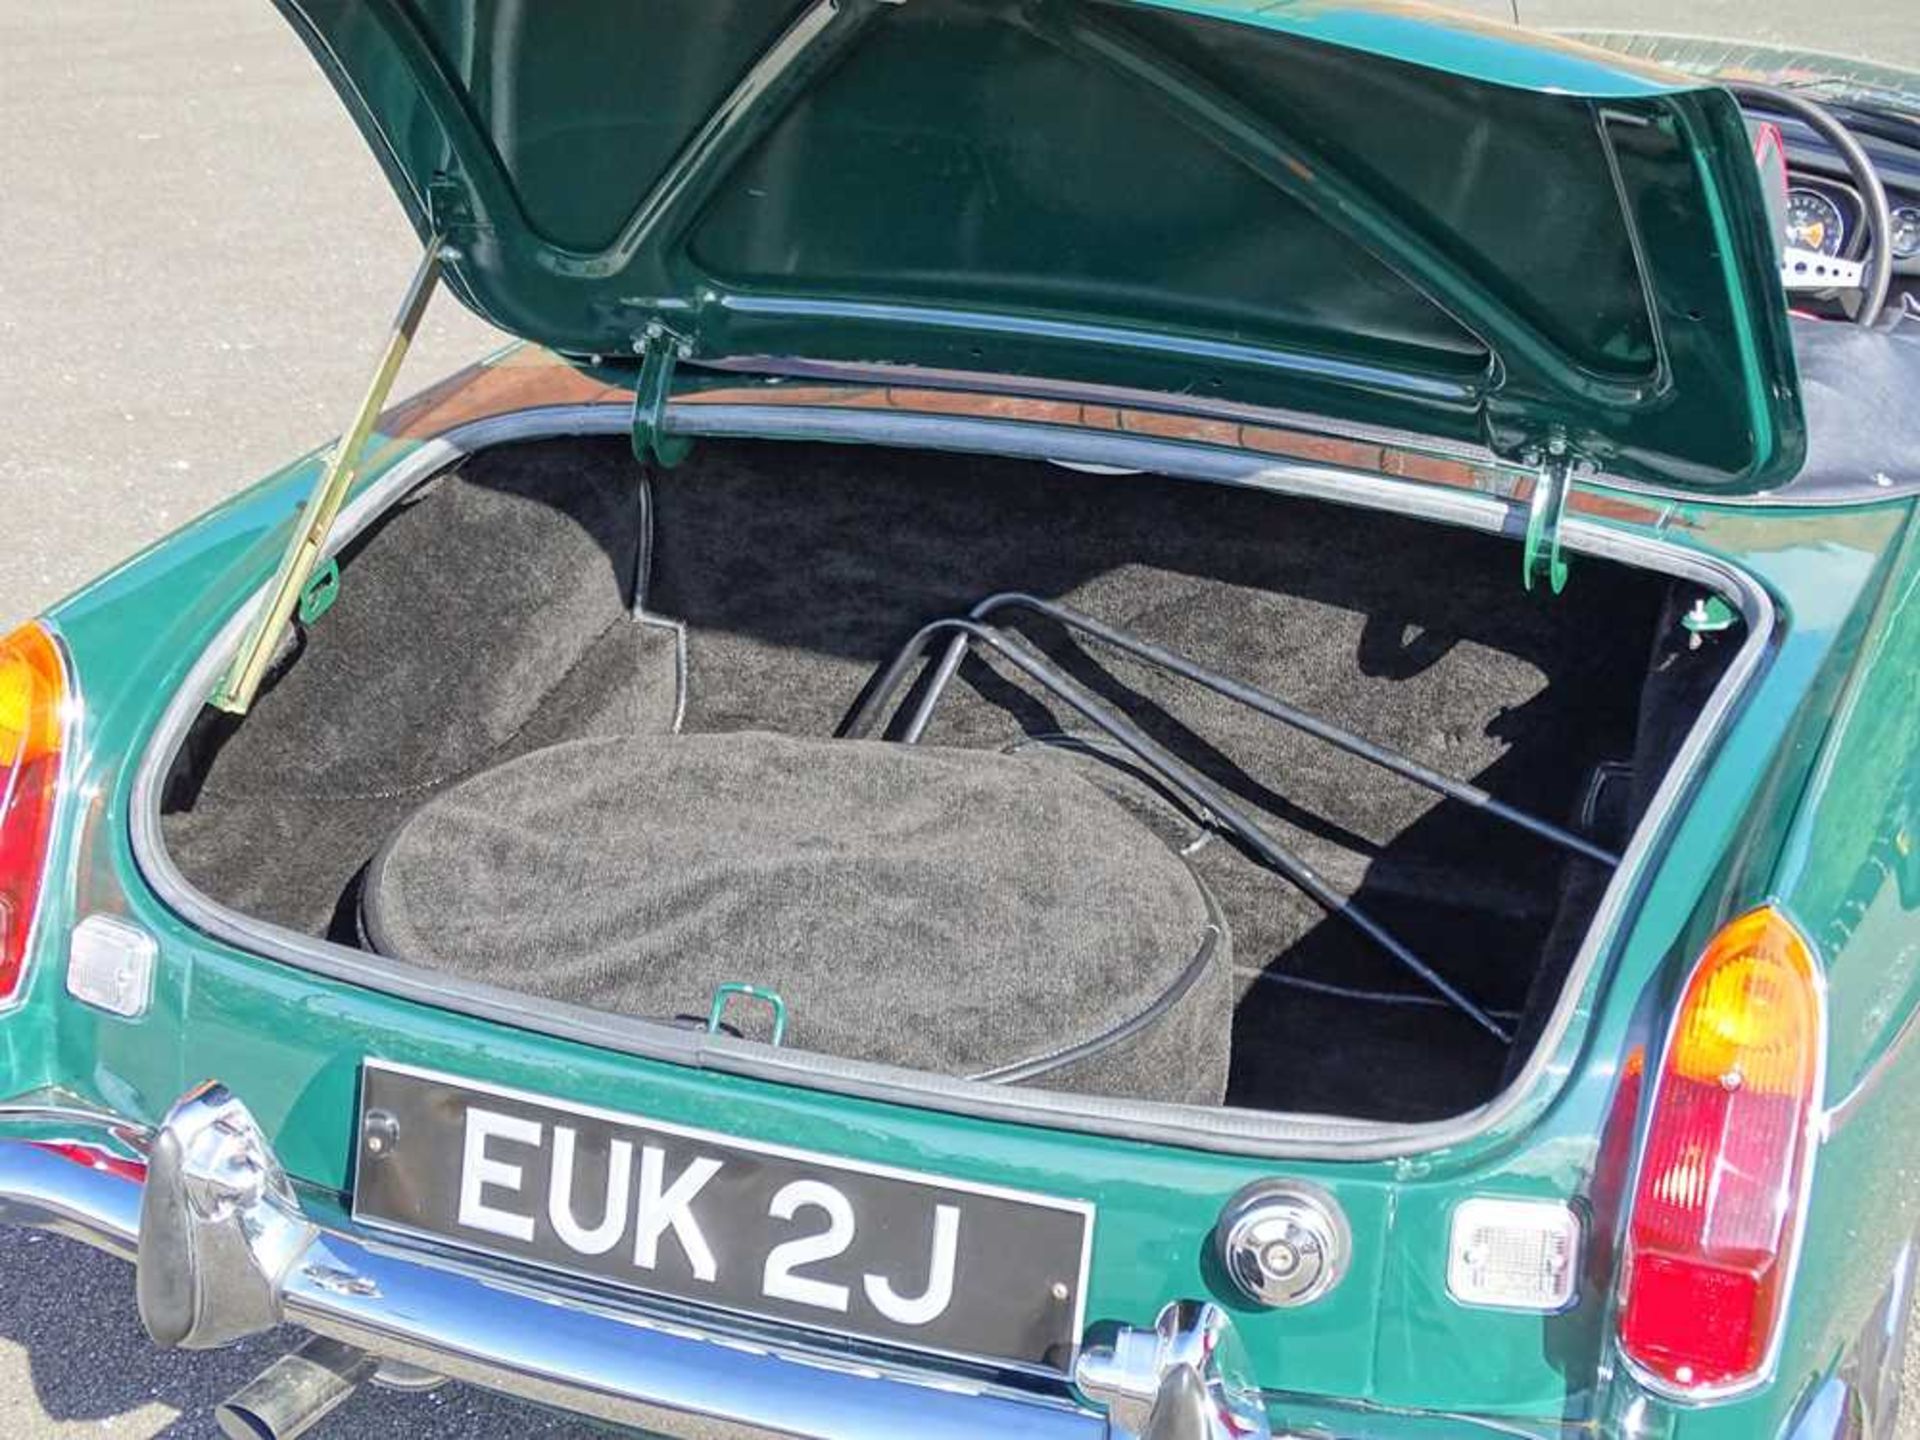 1971 MG B Roadster Restored at a cost of c.£33,000 - Image 23 of 43